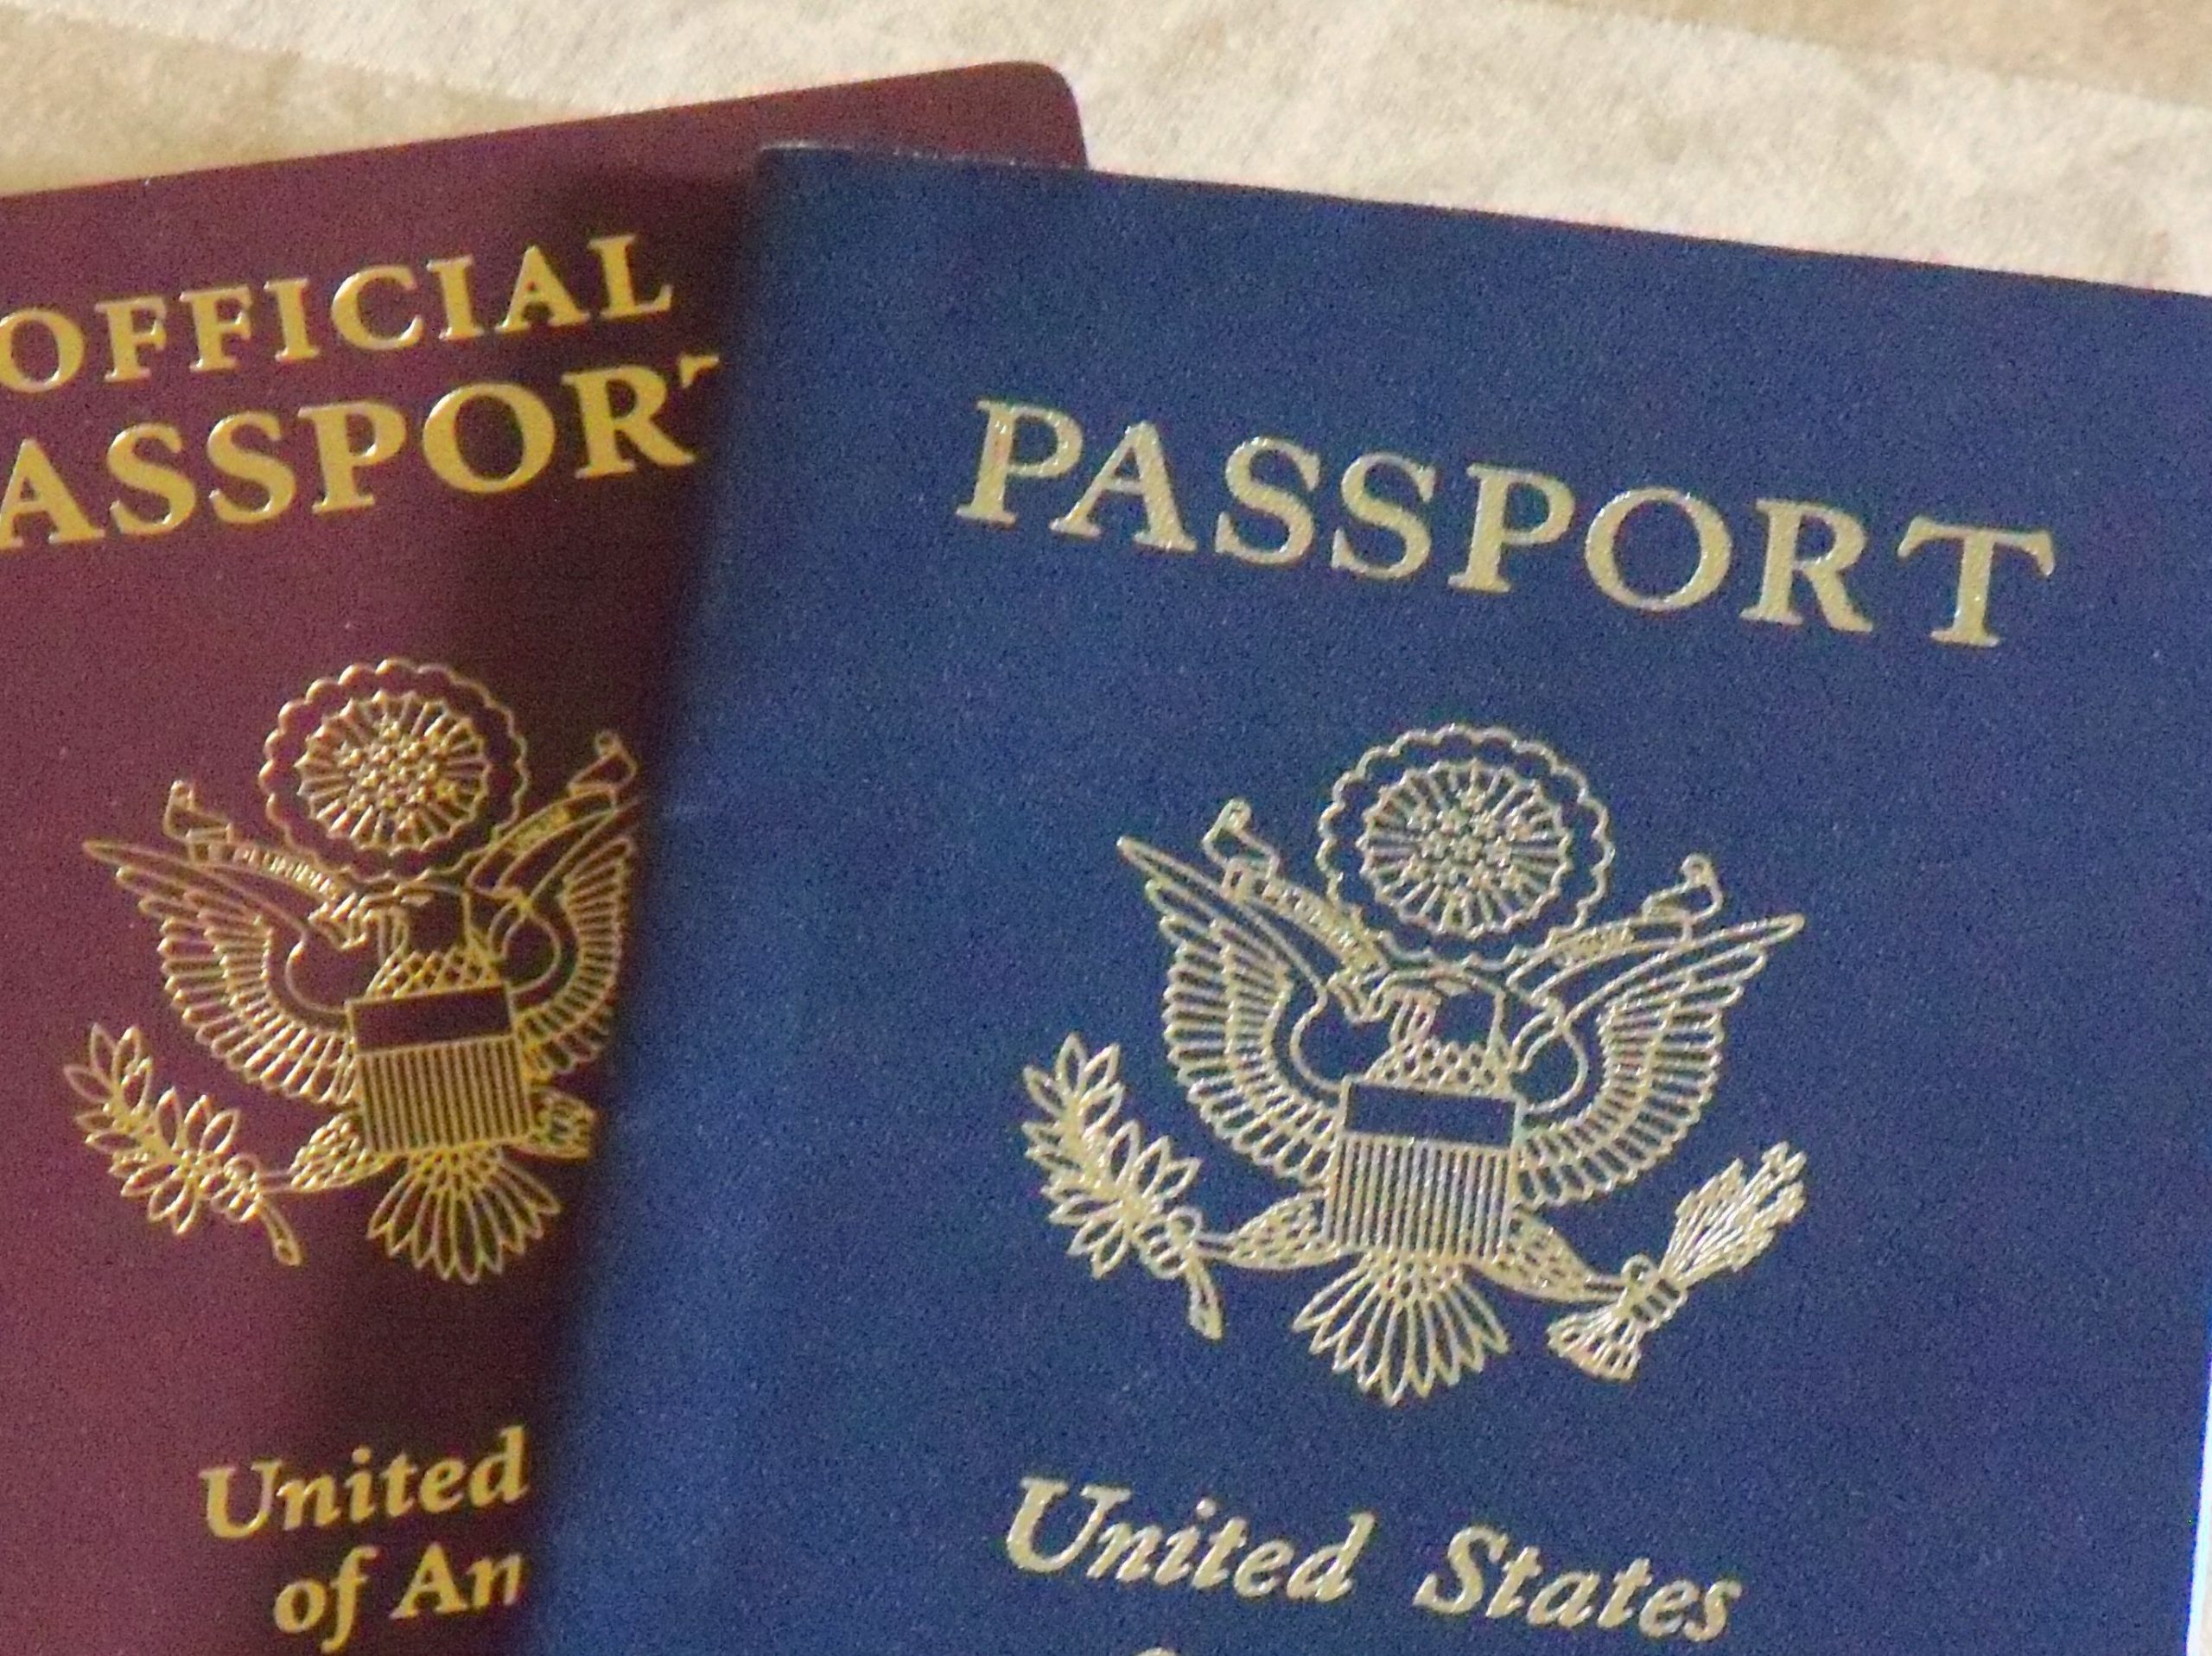 No Fee Passports And Tourist Passports What Is The Difference 